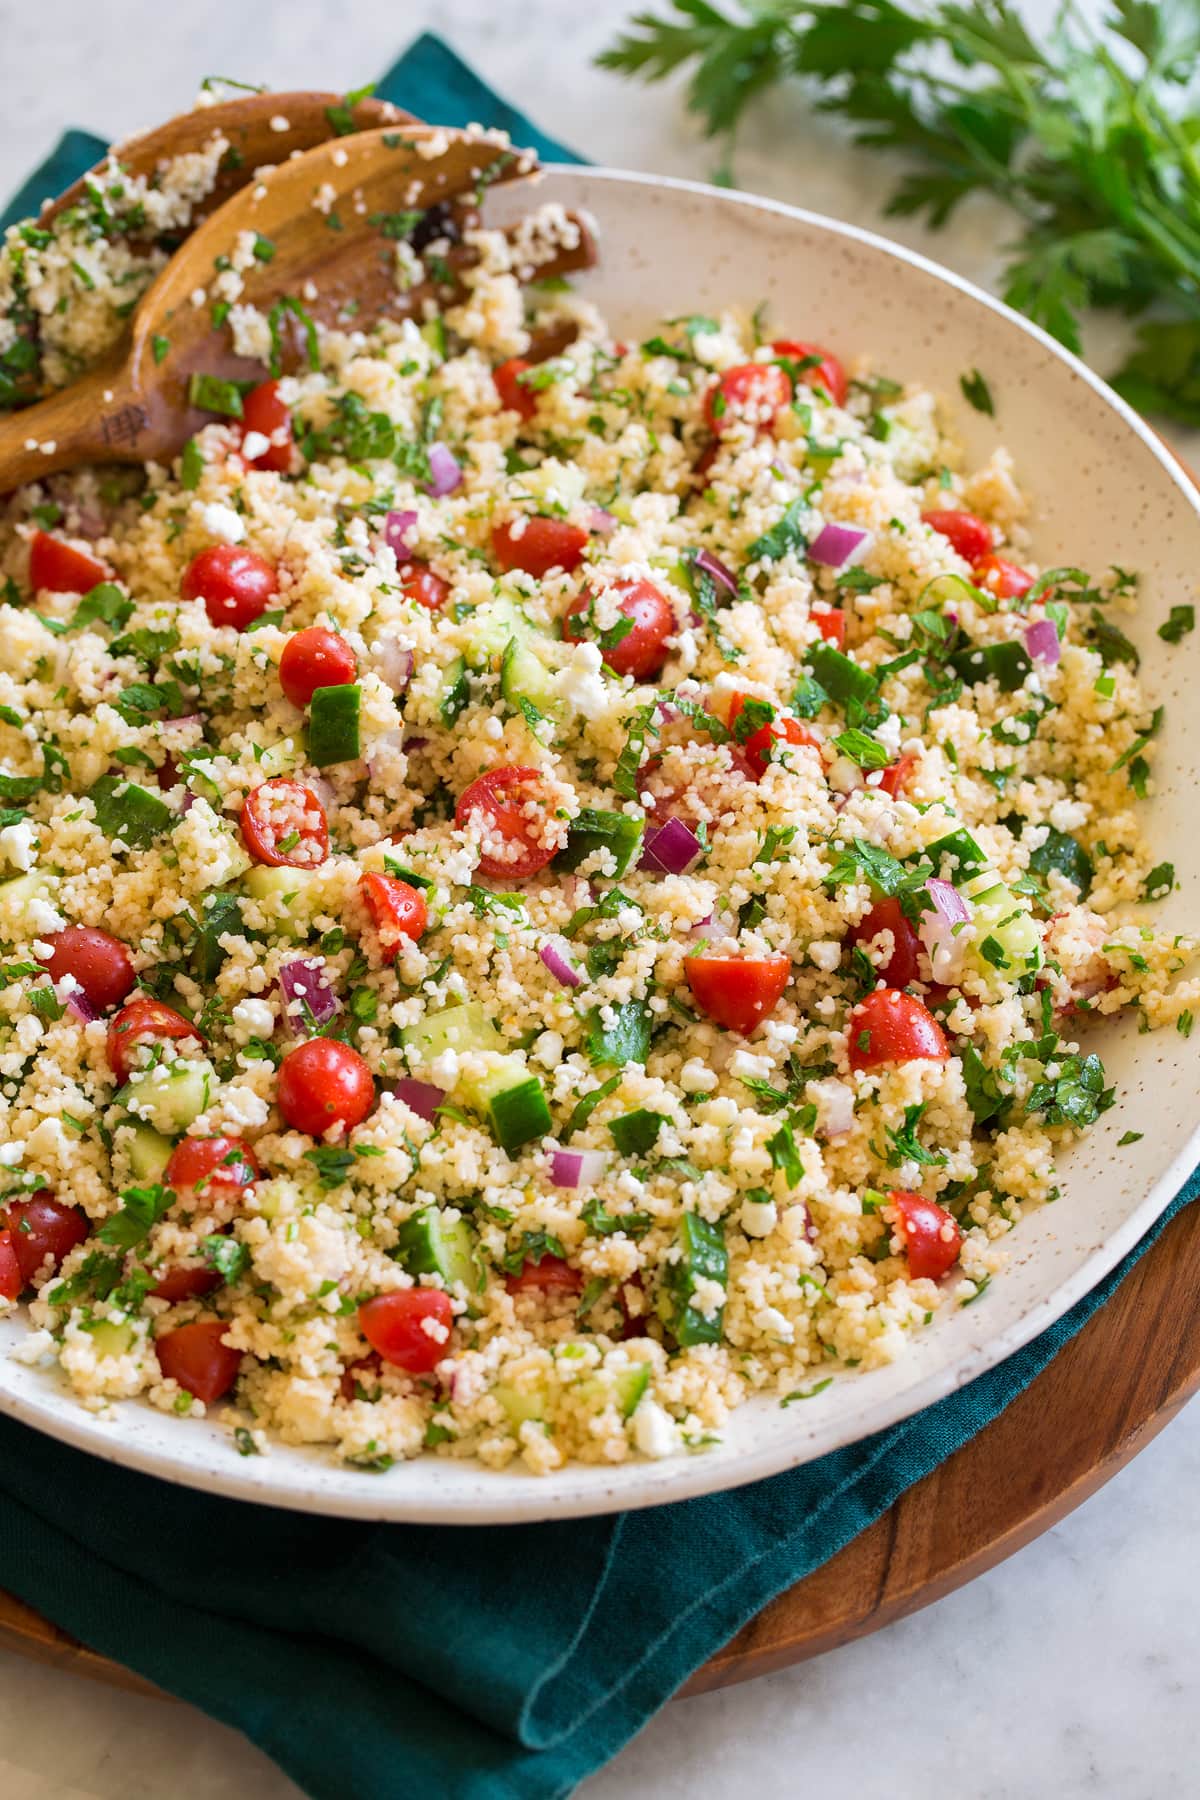 Couscous salad with cucumbers, tomatoes, and herbs shown in a white bowl from the side.